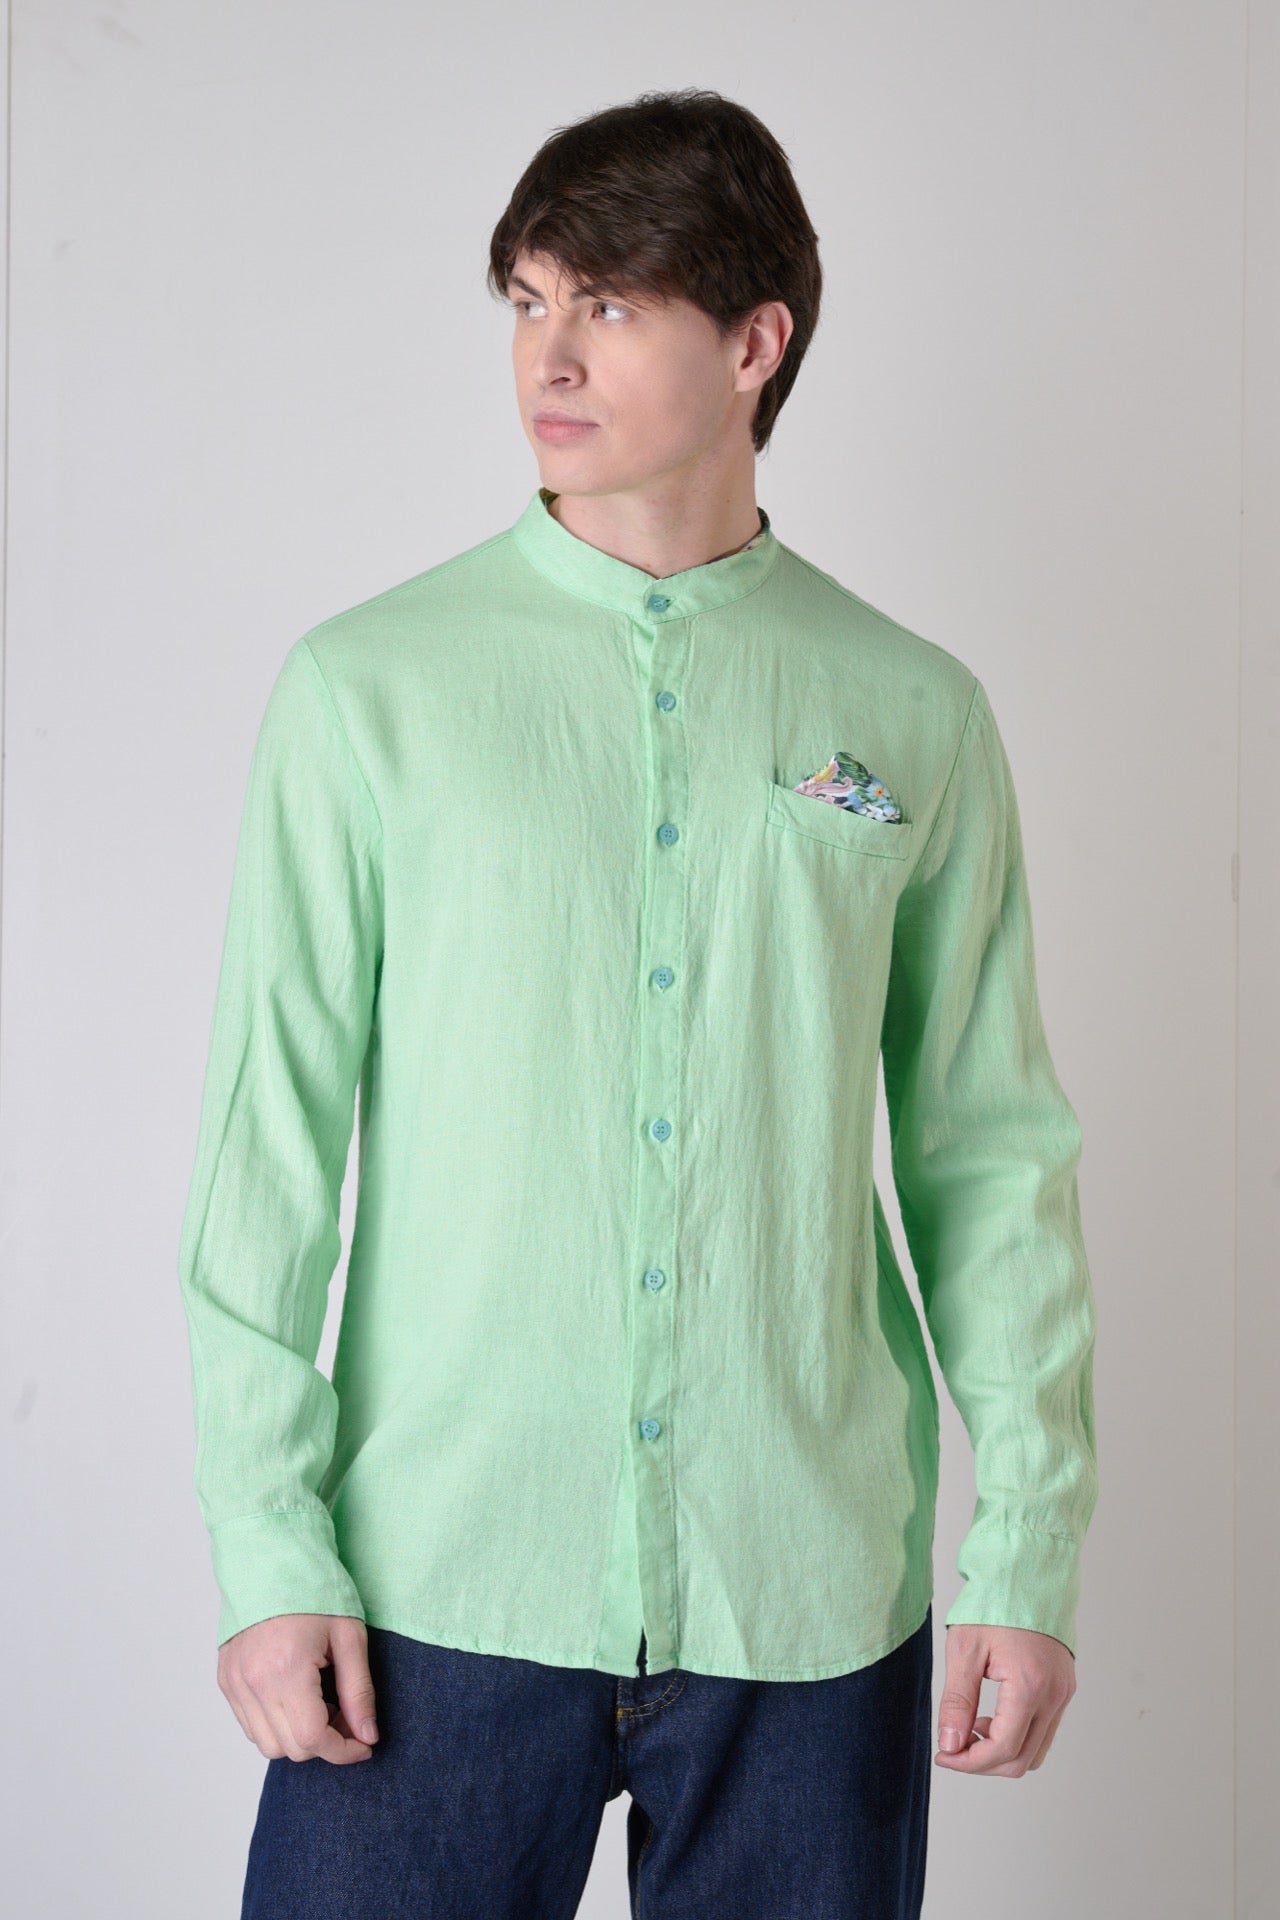 Korean Tailored Shirt in Mint Green Linen with Pocket Square, Interior and Cuffs in V2 Fabric